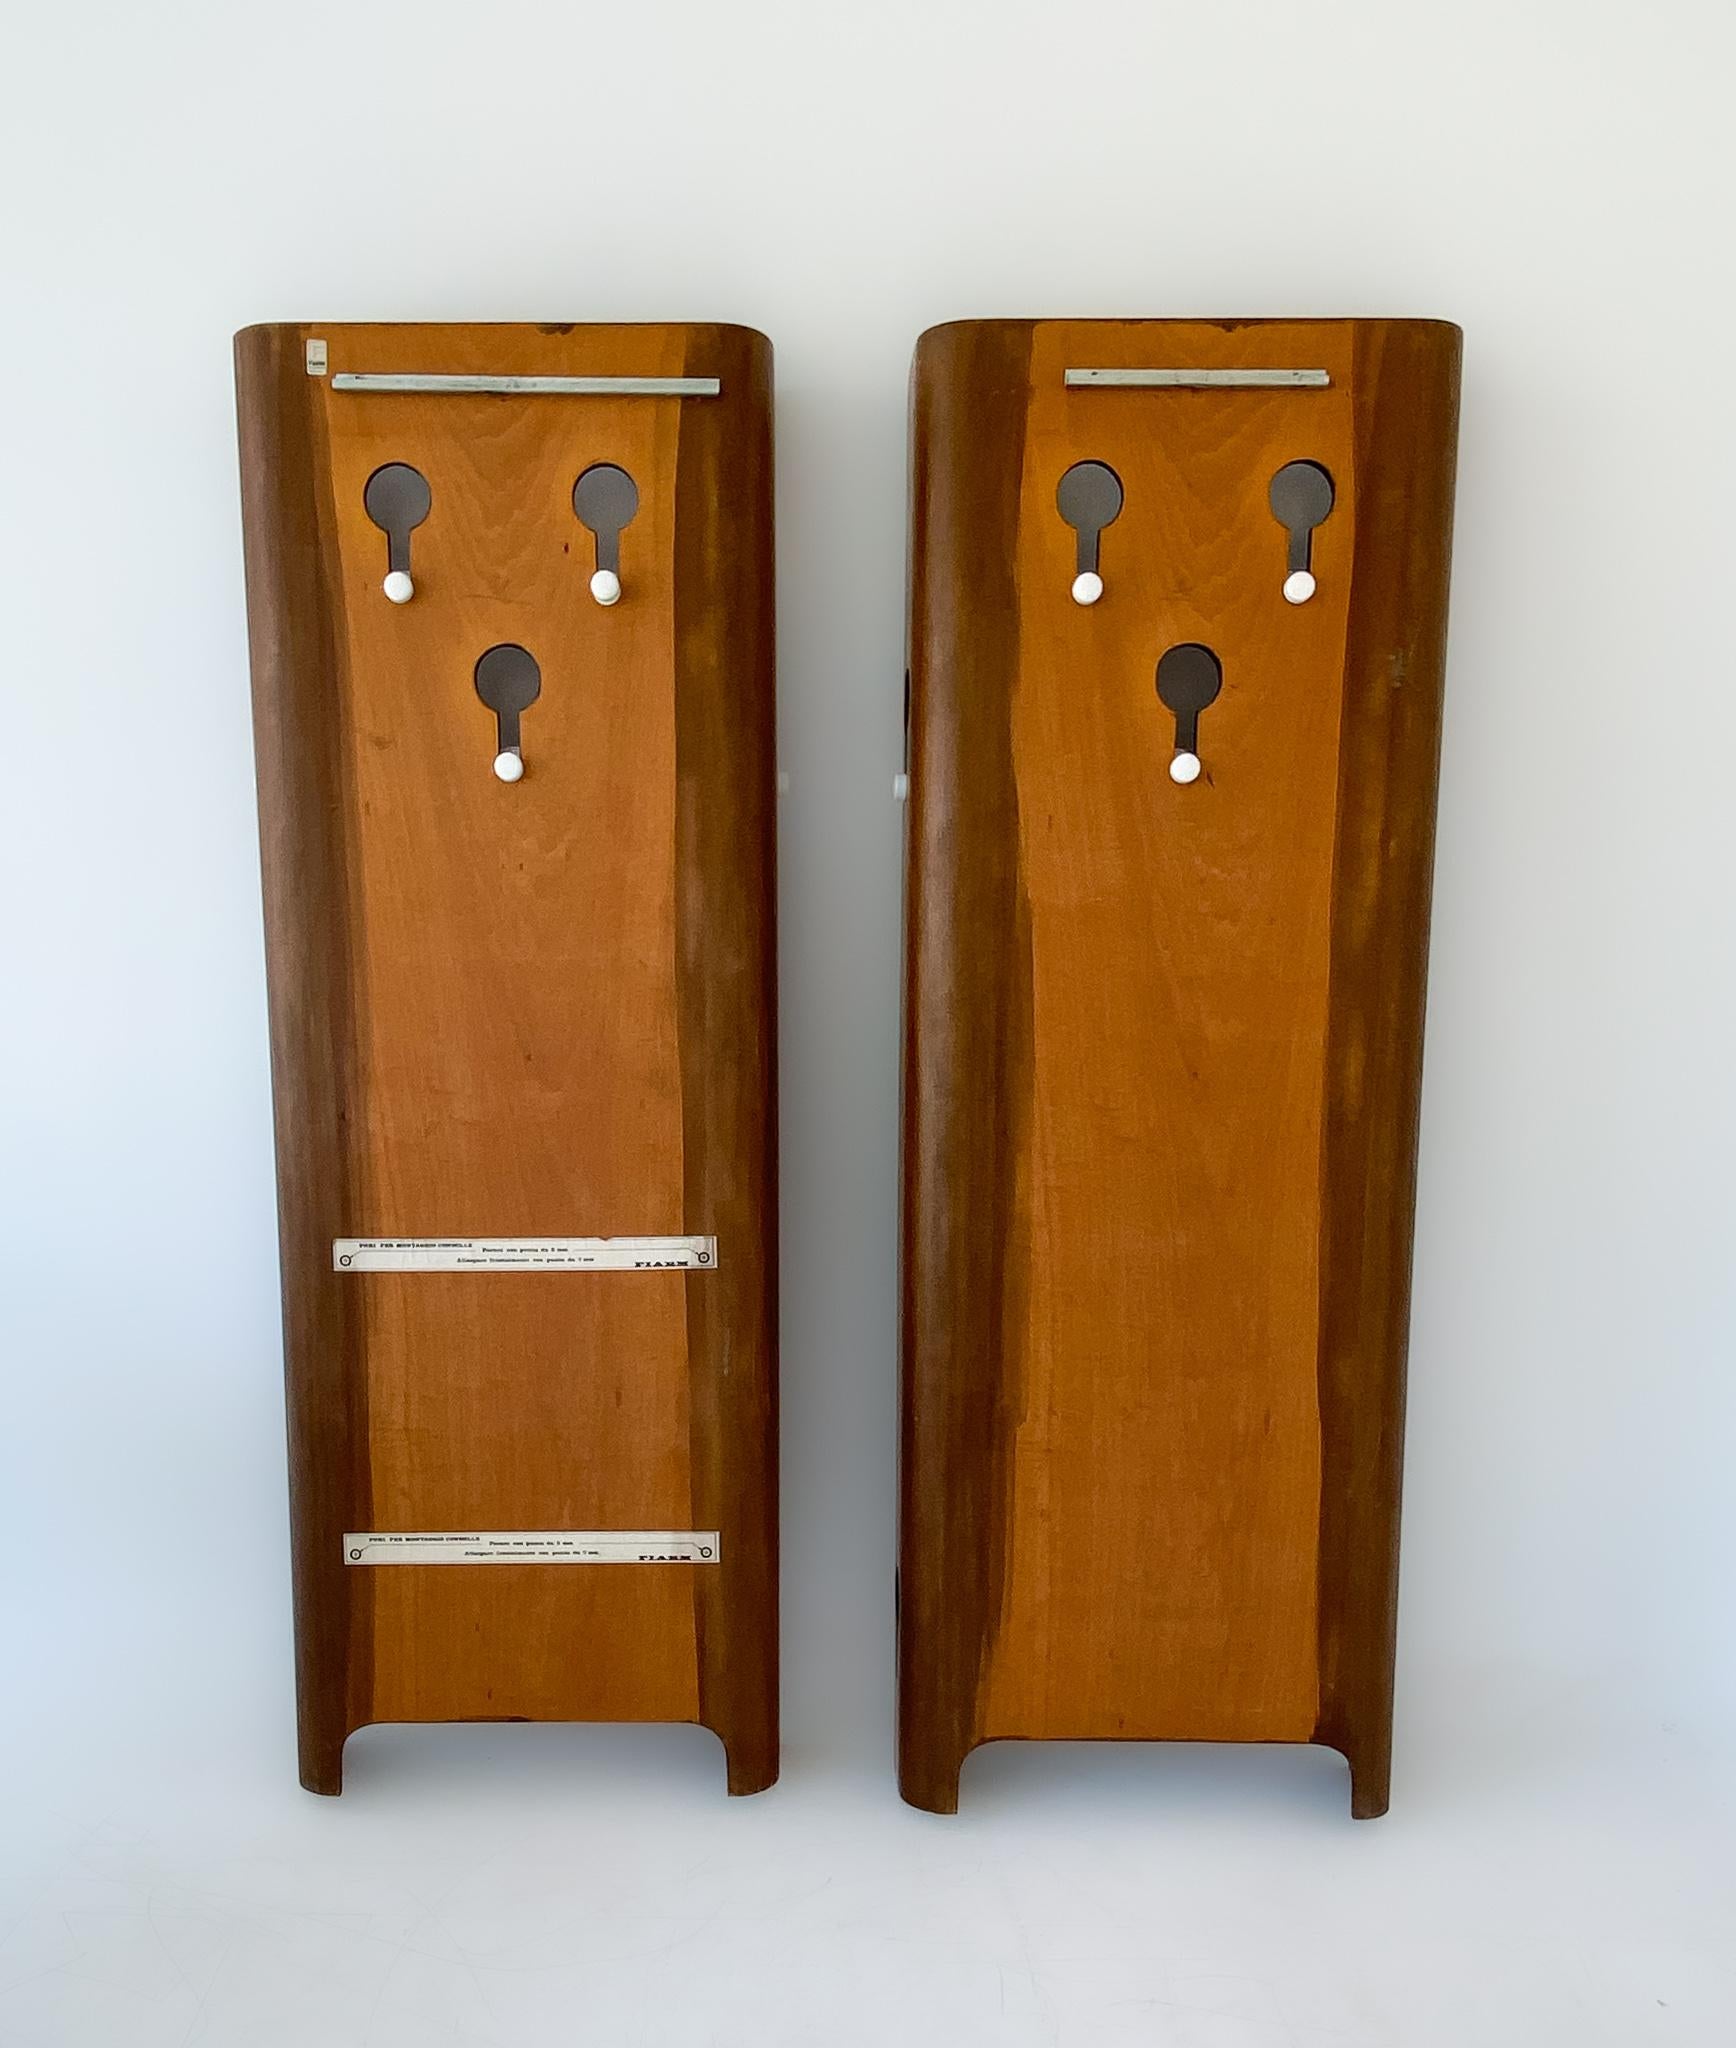 Mid-Century Modern Pair of Mid-Centery Modern Coat Hangers by Carlo de Carli for Fiarm, Italy 1960s